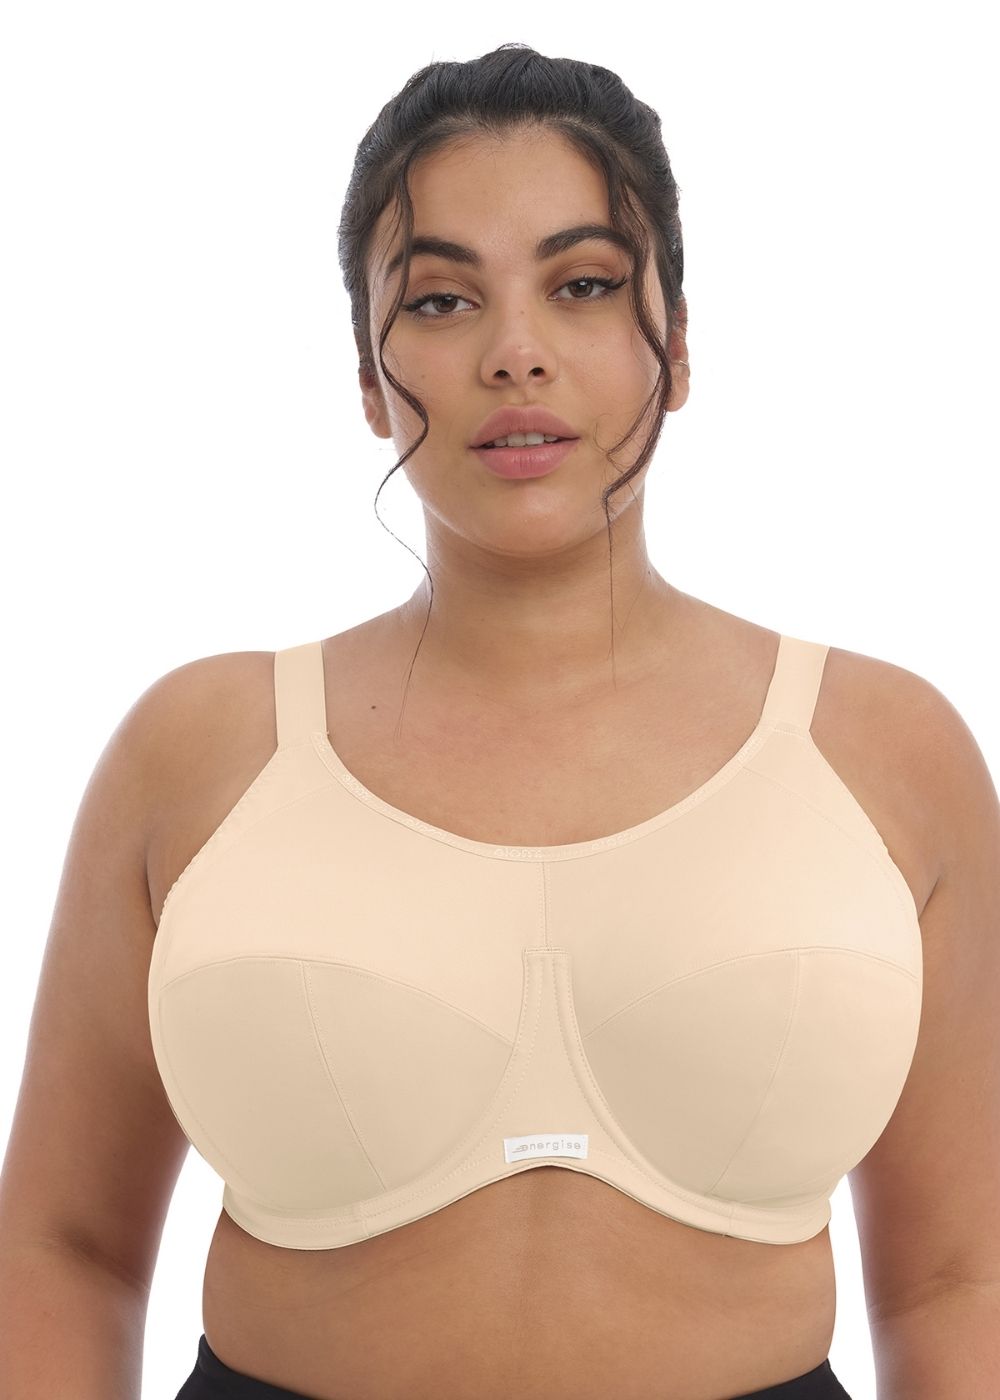 Elomi Energise Sports Bra in Pomegranate (POT) FINAL SALE (40% Off) -  Busted Bra Shop